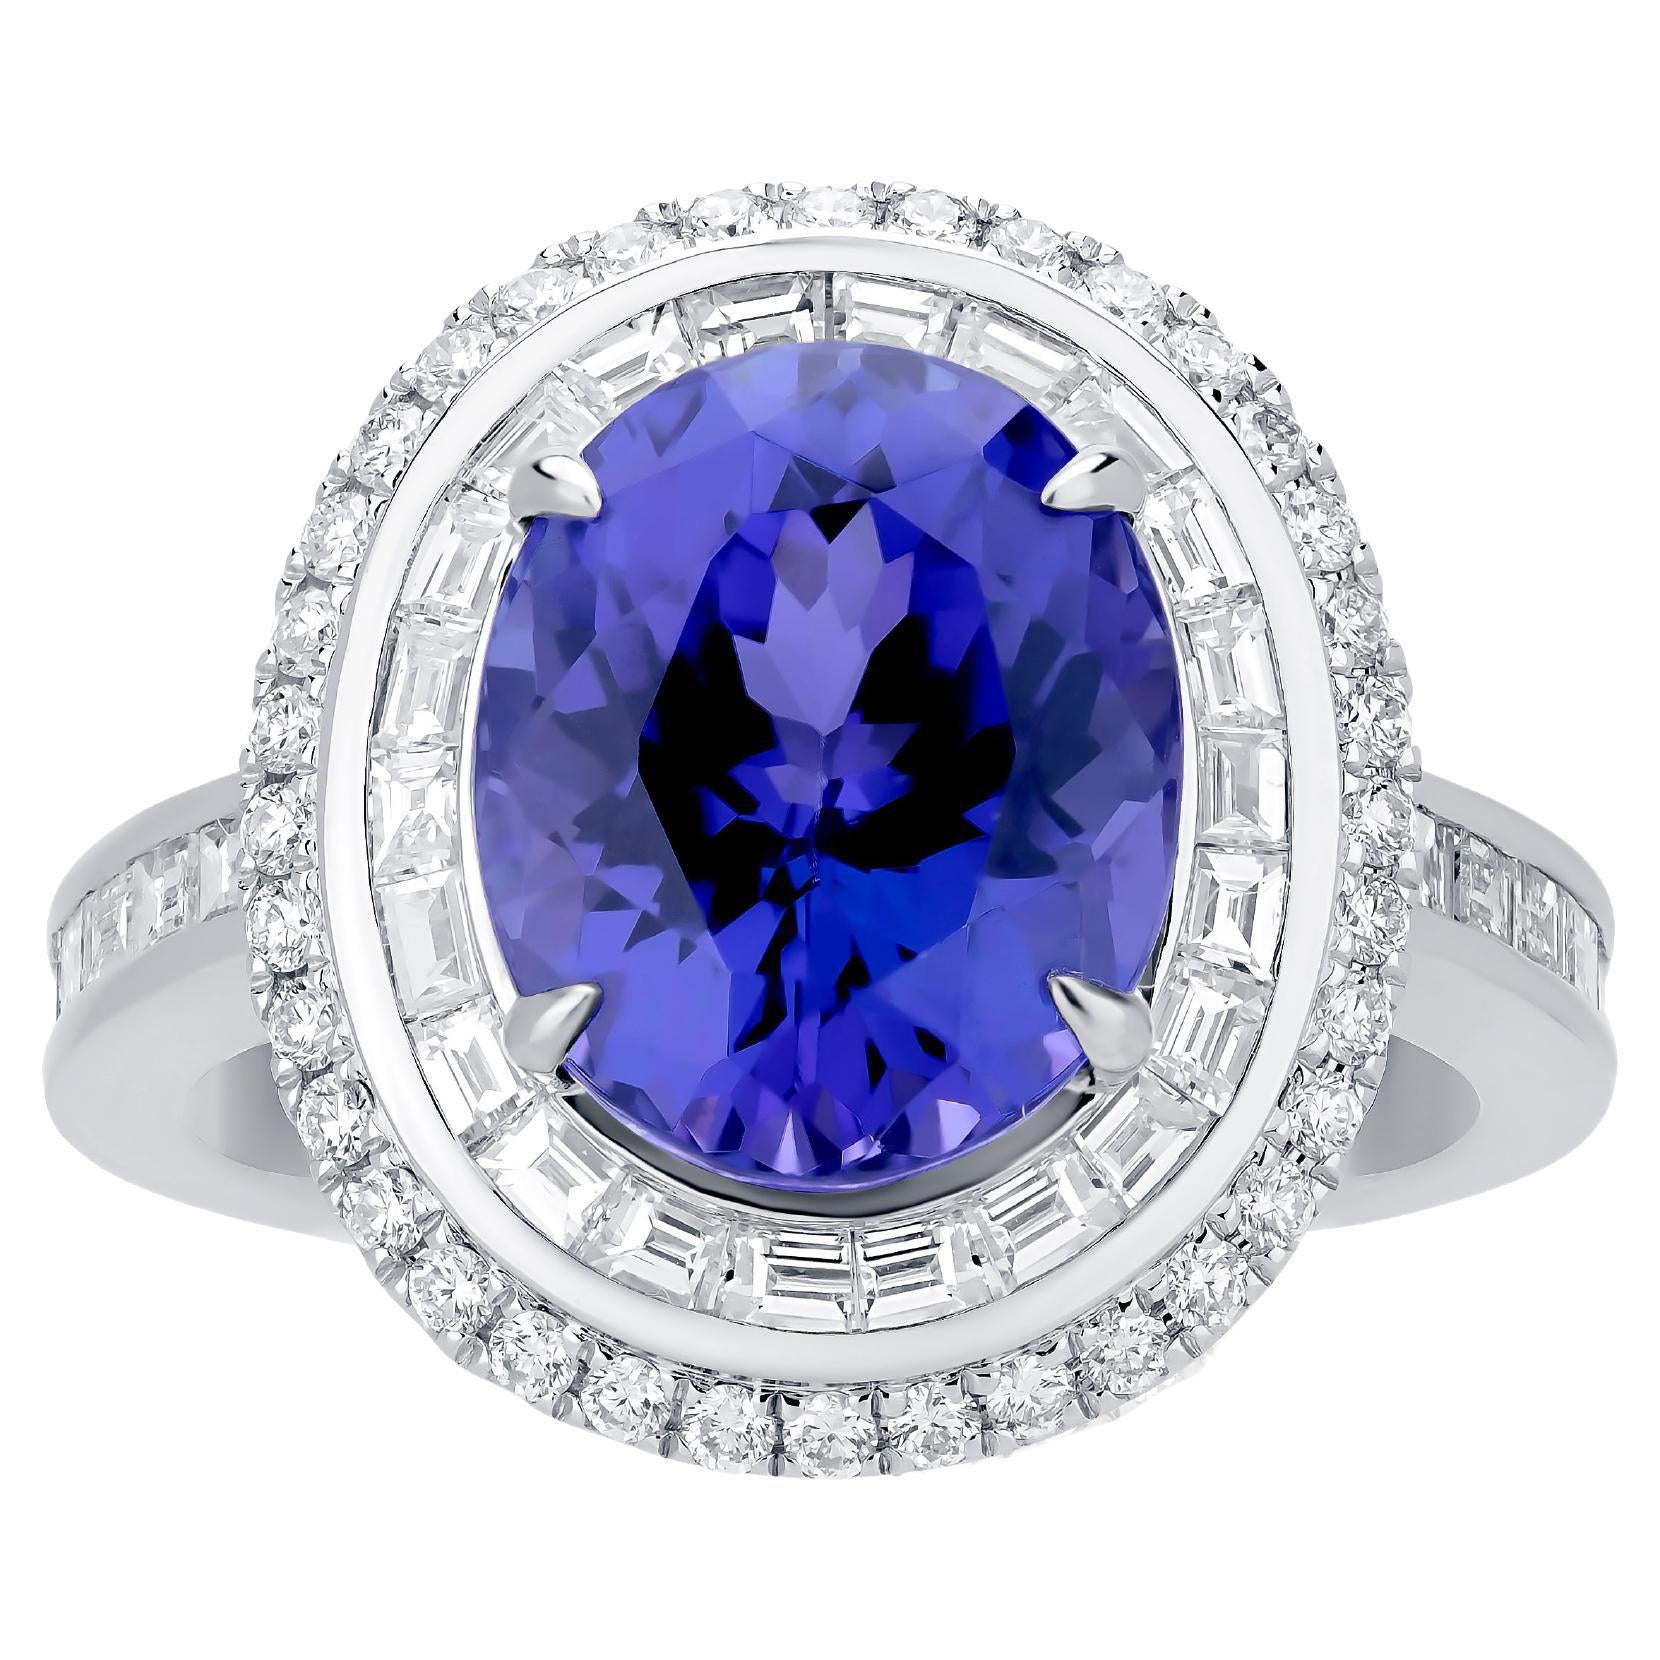 Nigaam 5.41cts. Oval Tanzanite and 1.25Cts. Diamond Cluster Ring in 18k Gold